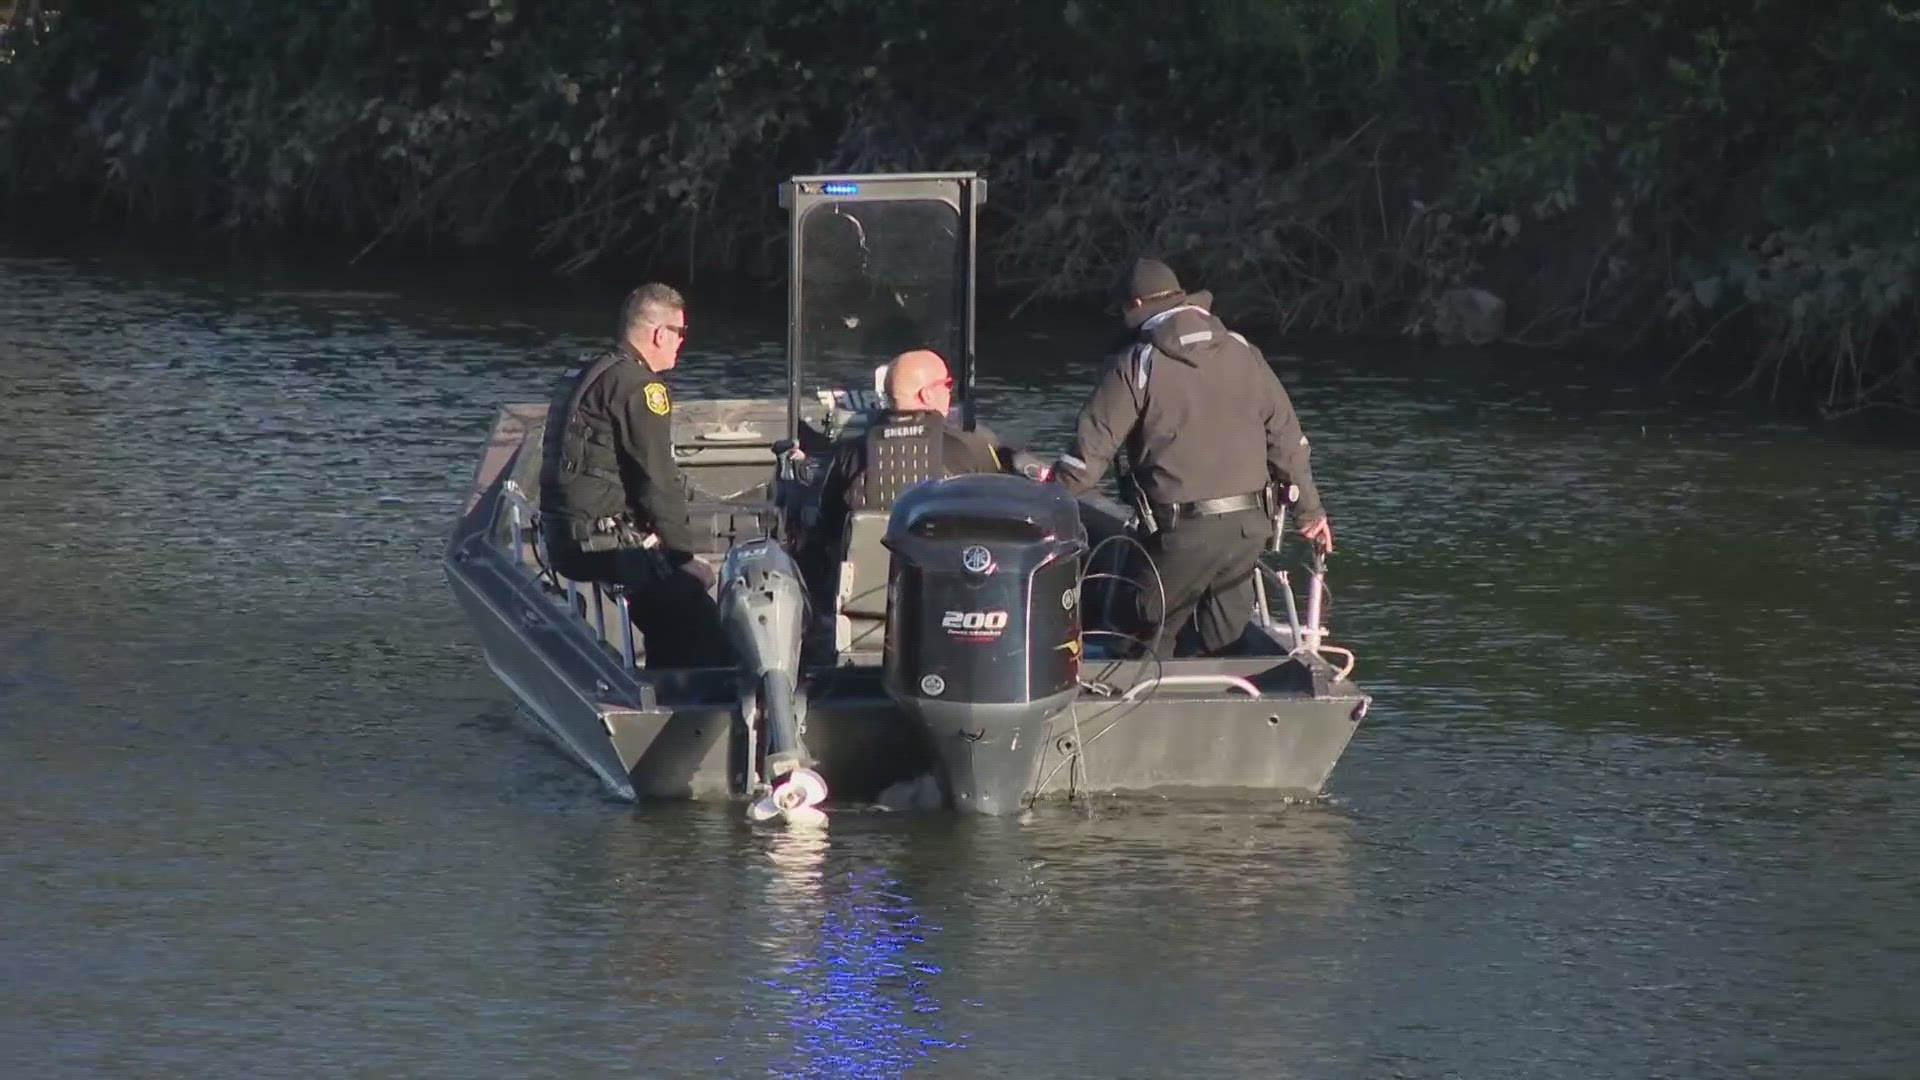 Officials say two teens jumped into the water, but only one of them came back up.